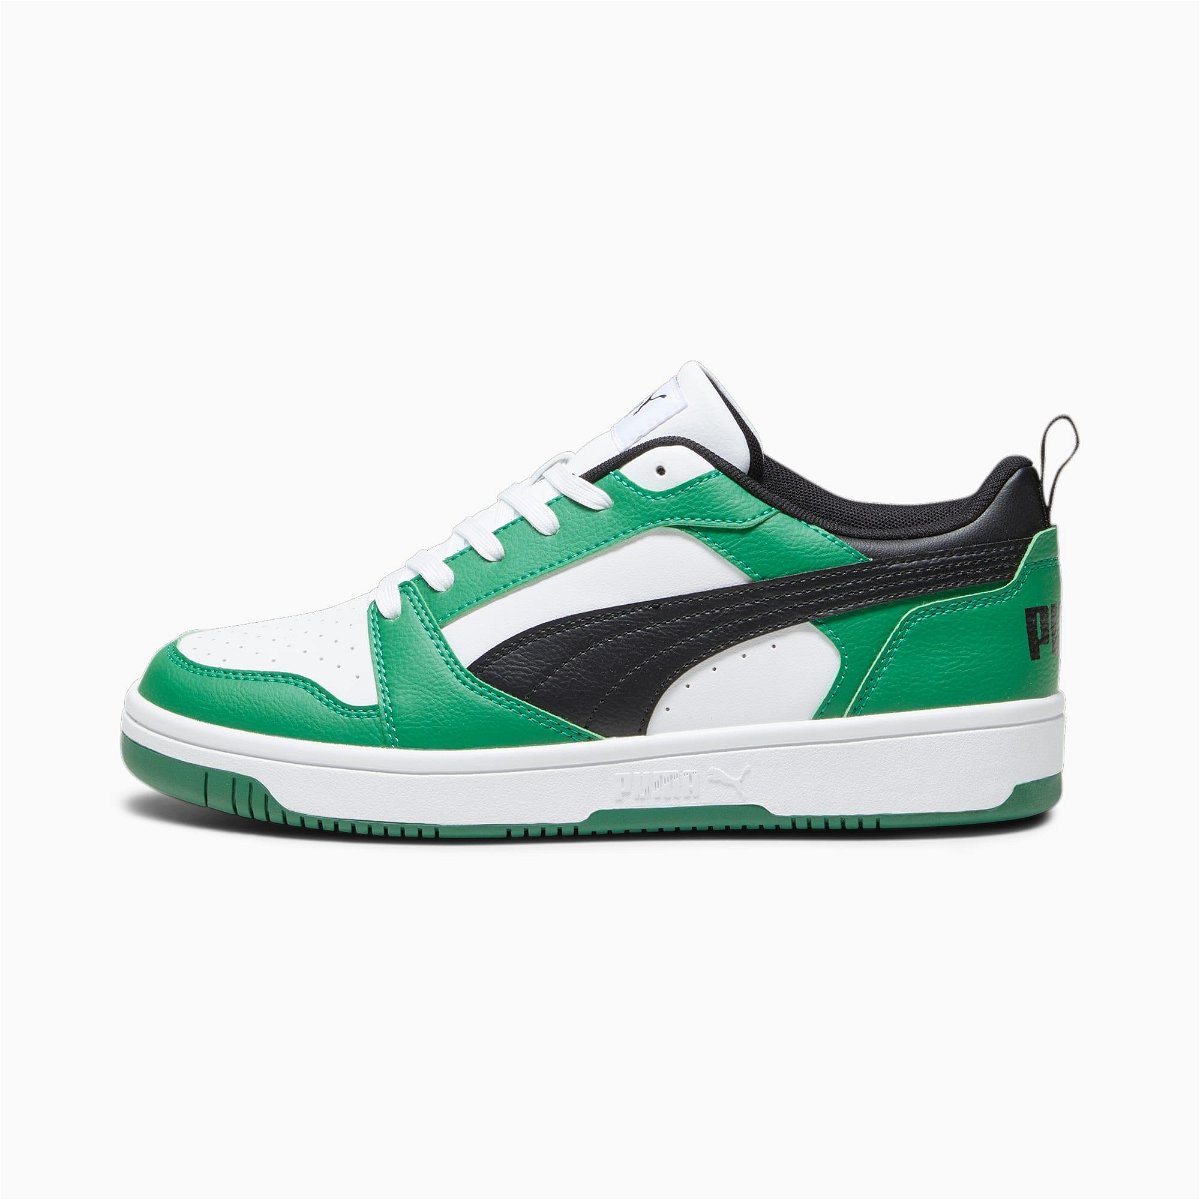 Rebound V6 Low Sneakers by PUMA | jellibeans